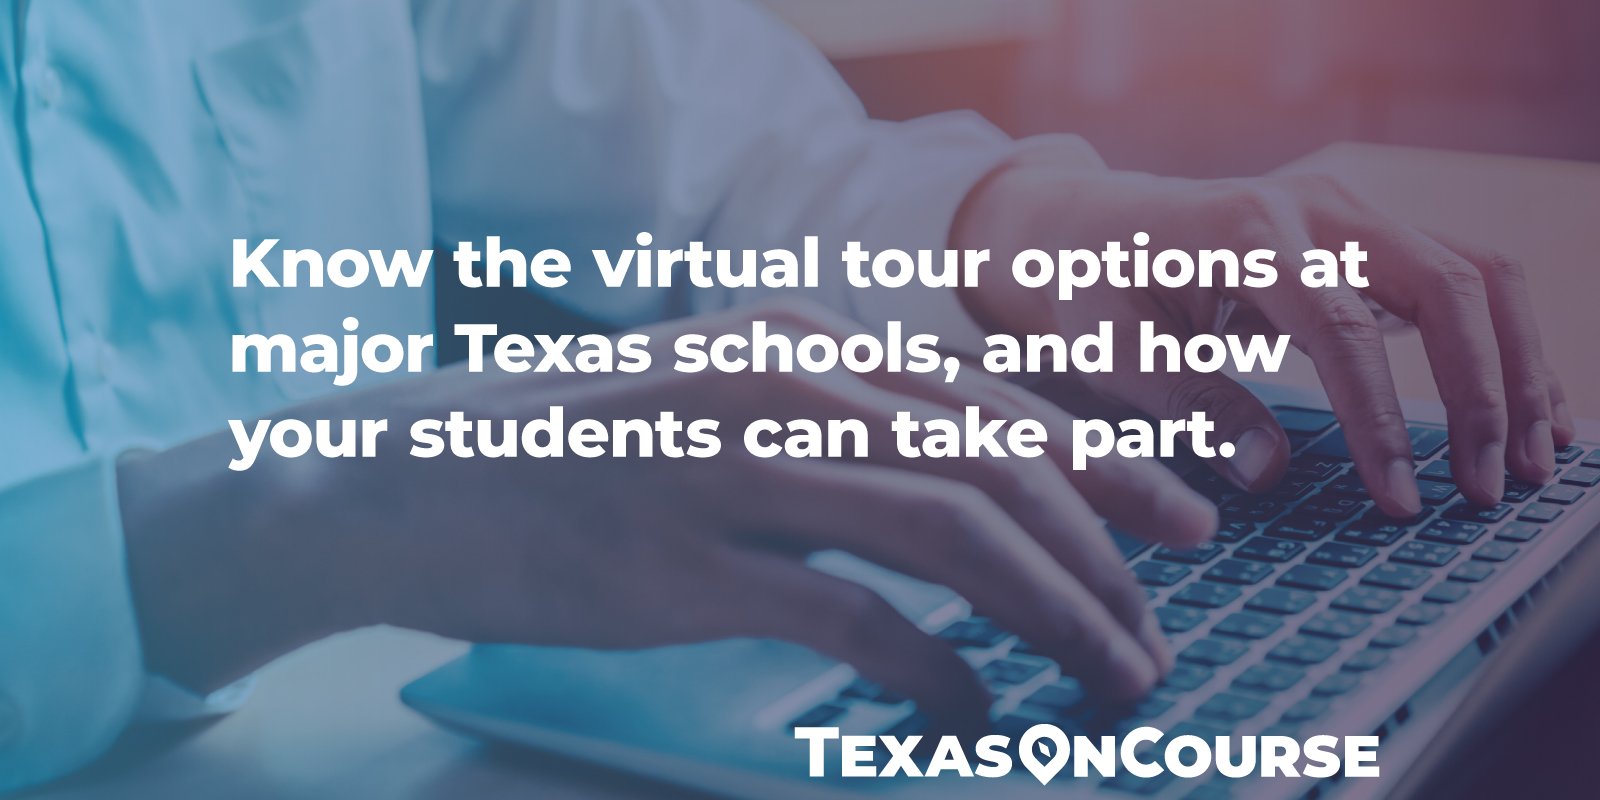 Know the virtual tour options at major Texas schools and how your students can take part.